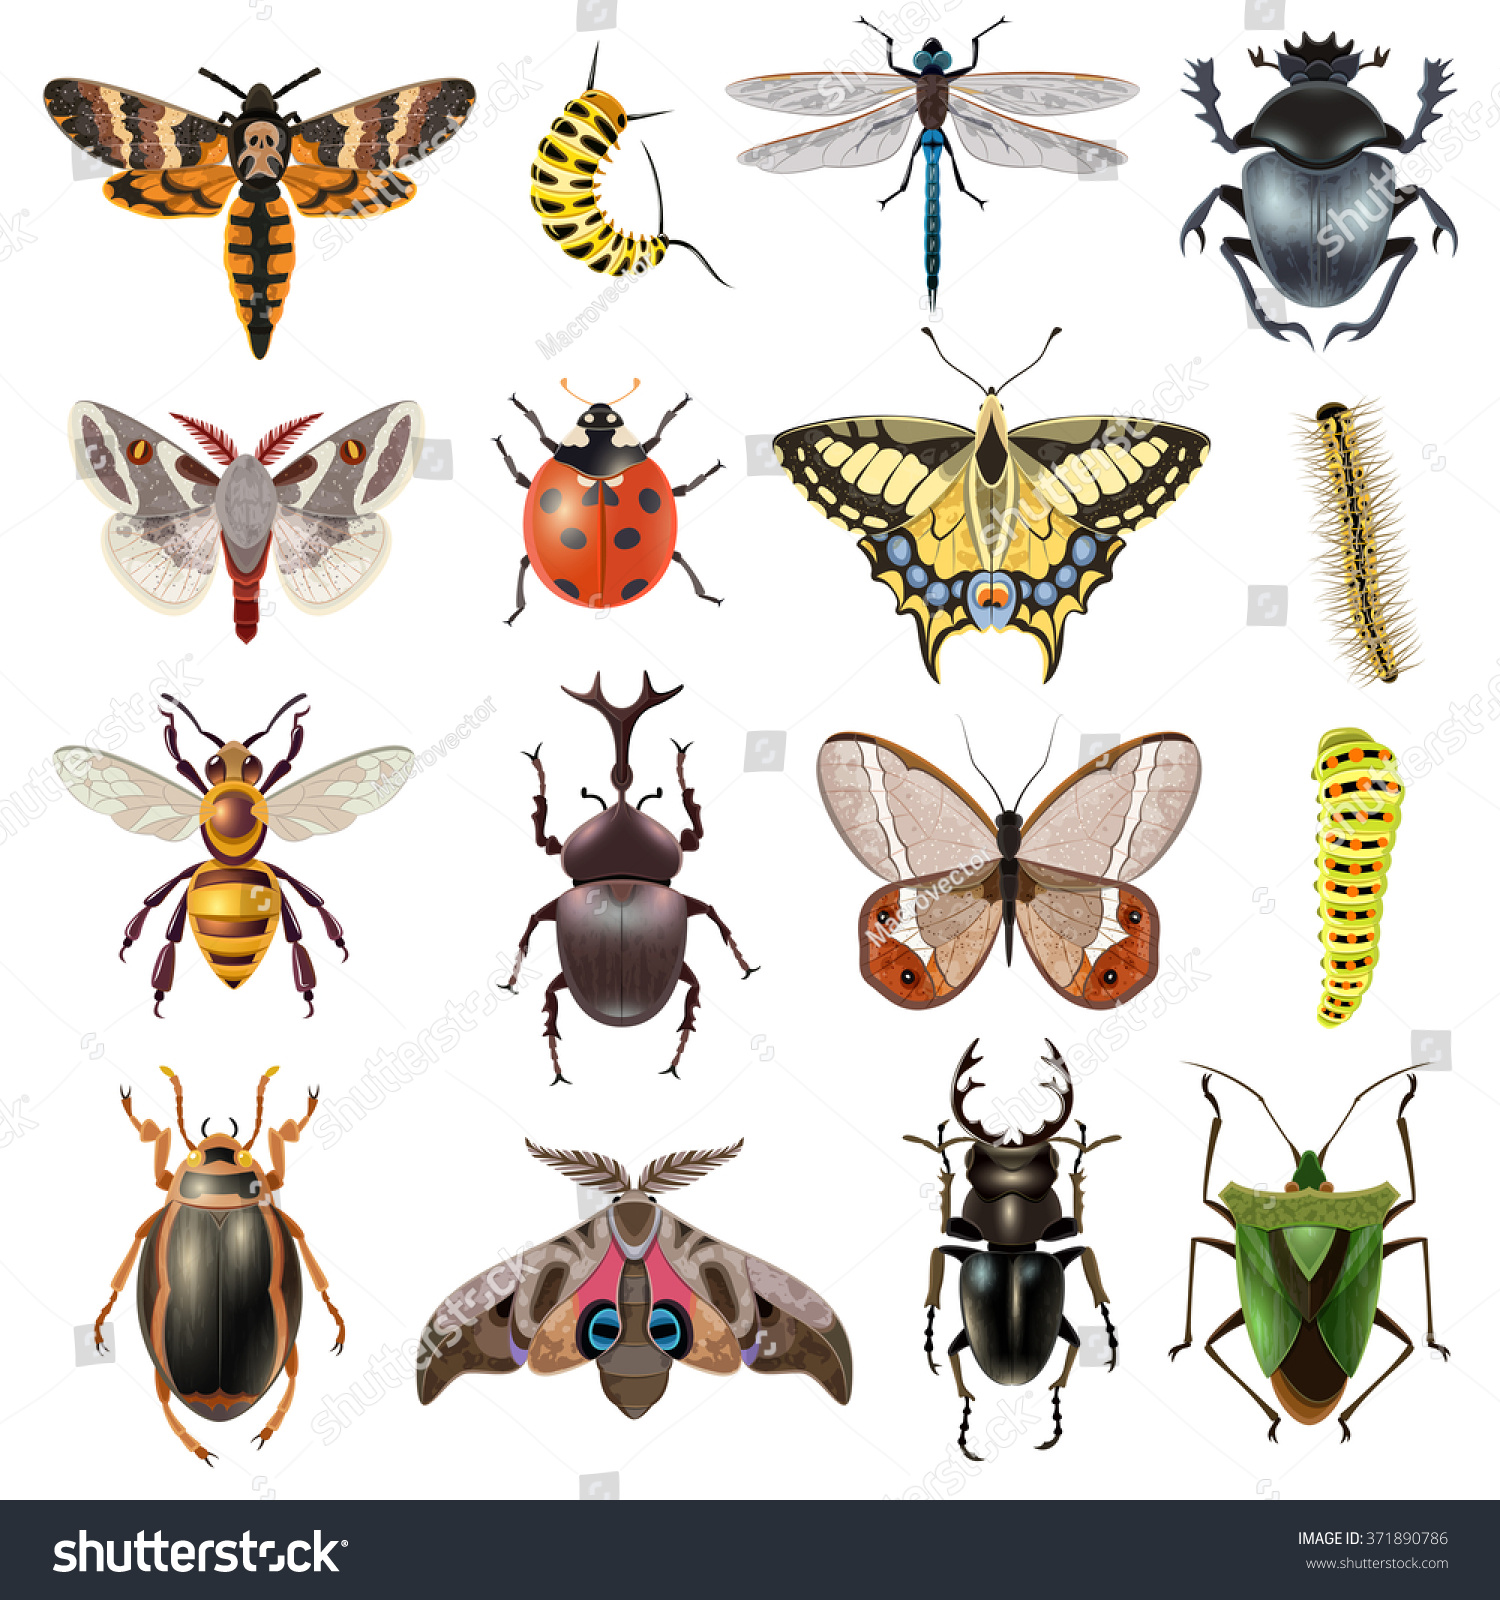 11,264 Bugs realistic Stock Illustrations, Images & Vectors | Shutterstock